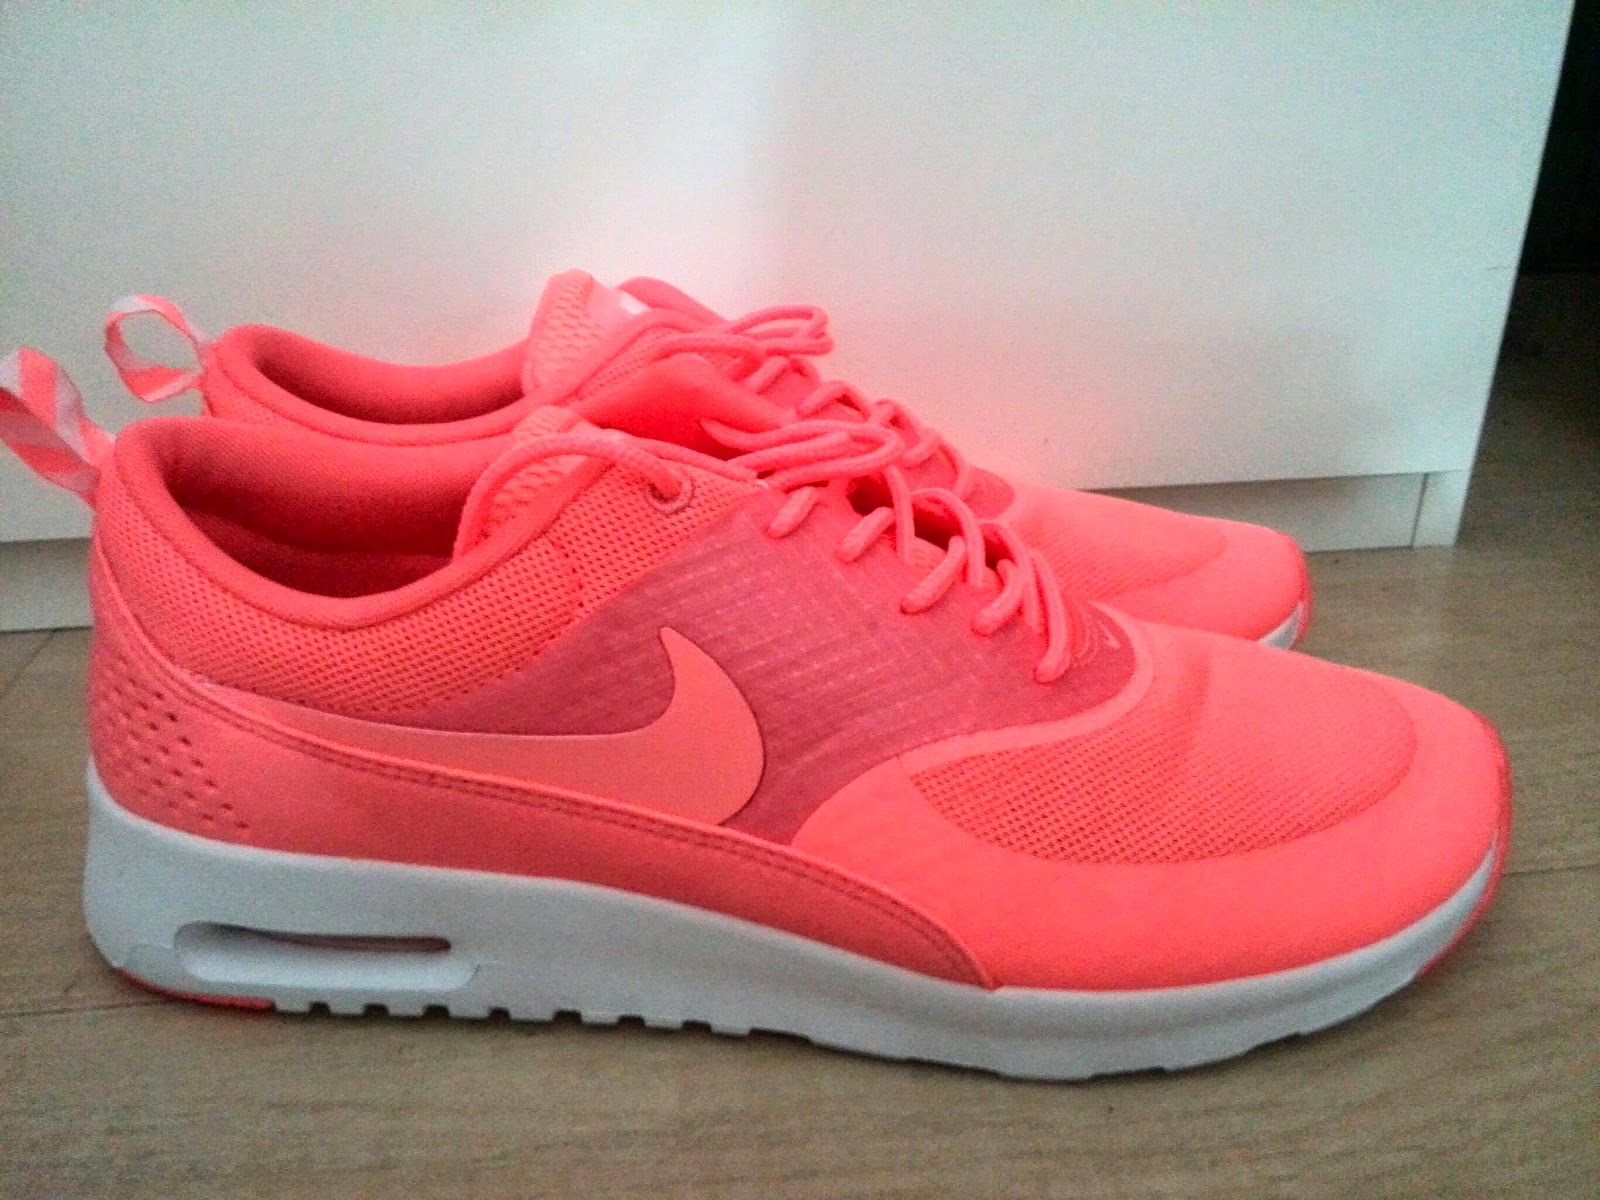 Buy Online nike air max thea atomic pink Cheap > OFF71% Discounted